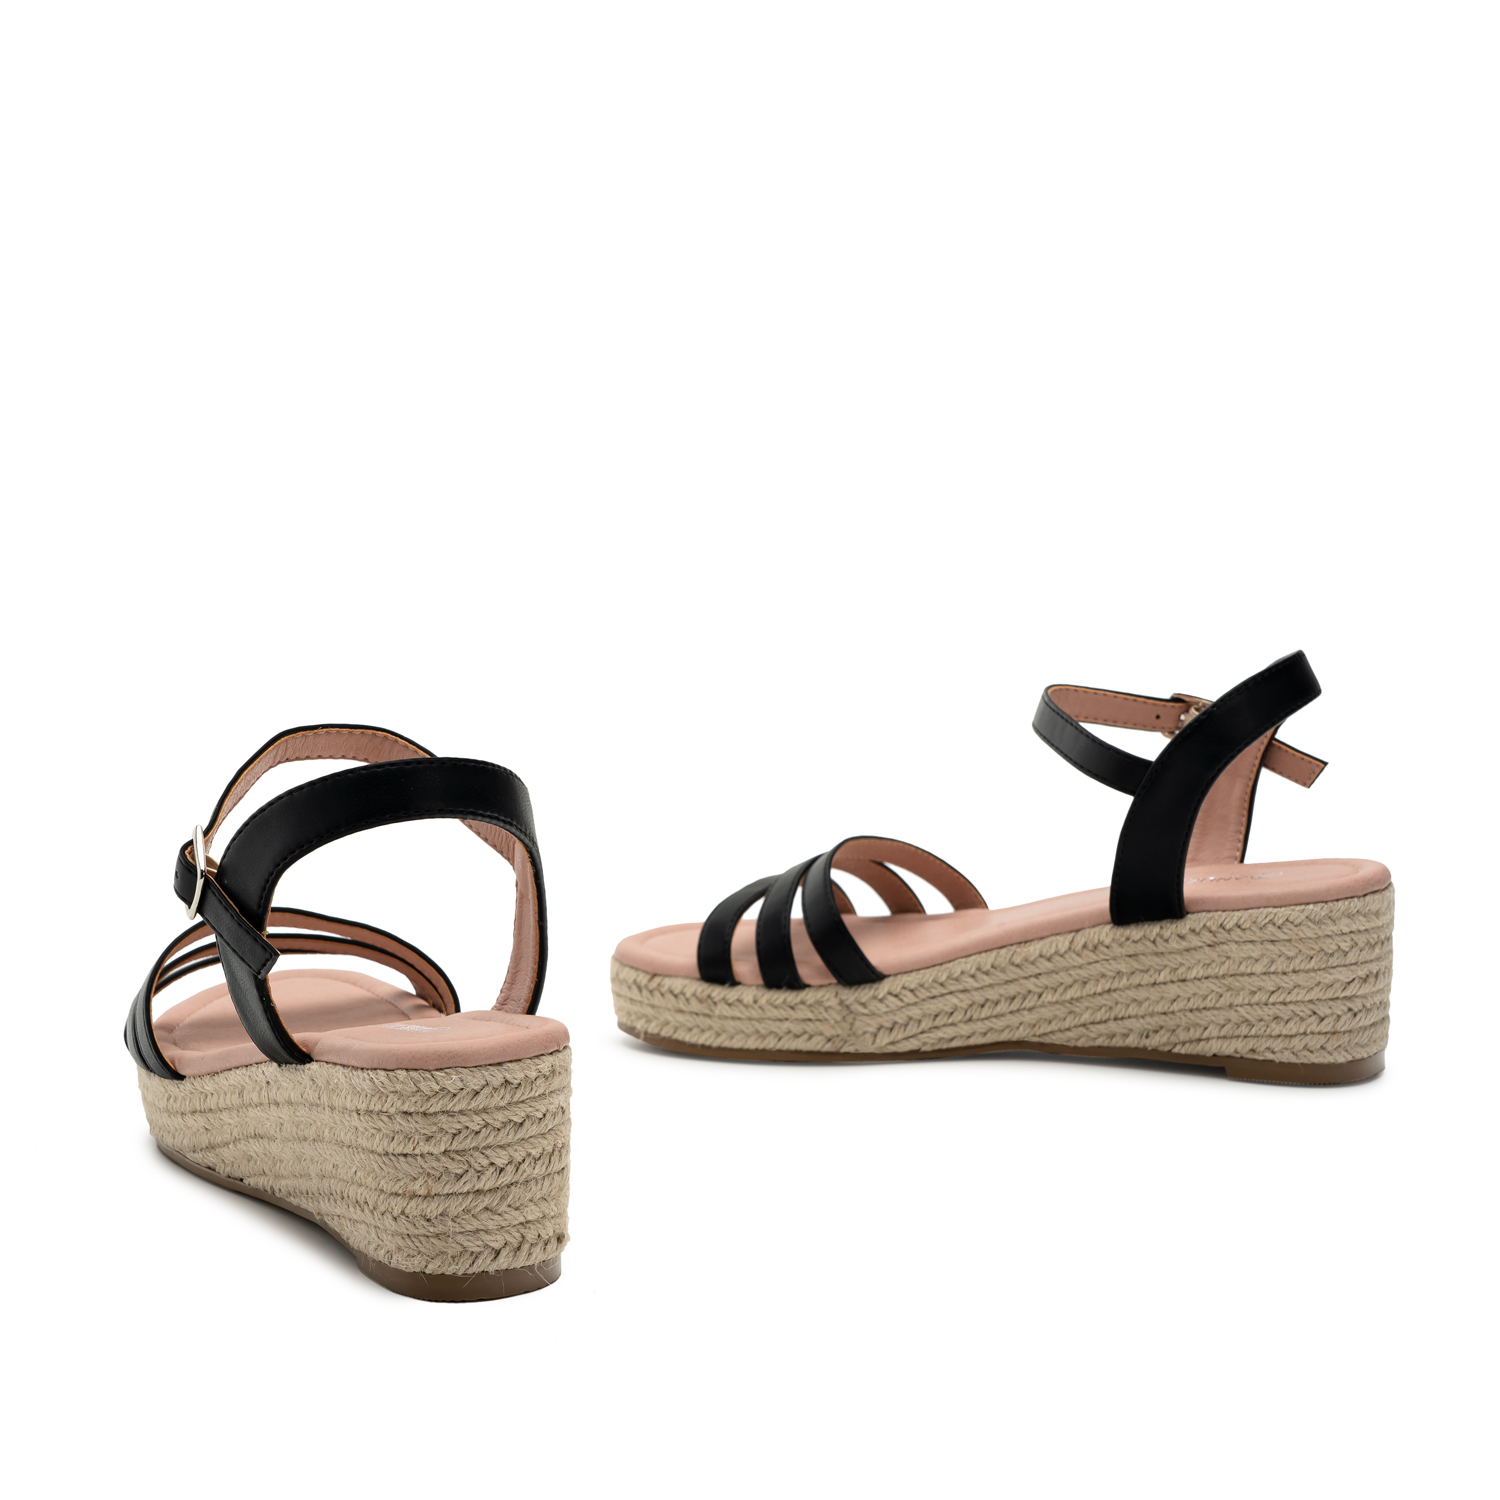 Black Faux Leather Sandals with Jute Wedge 